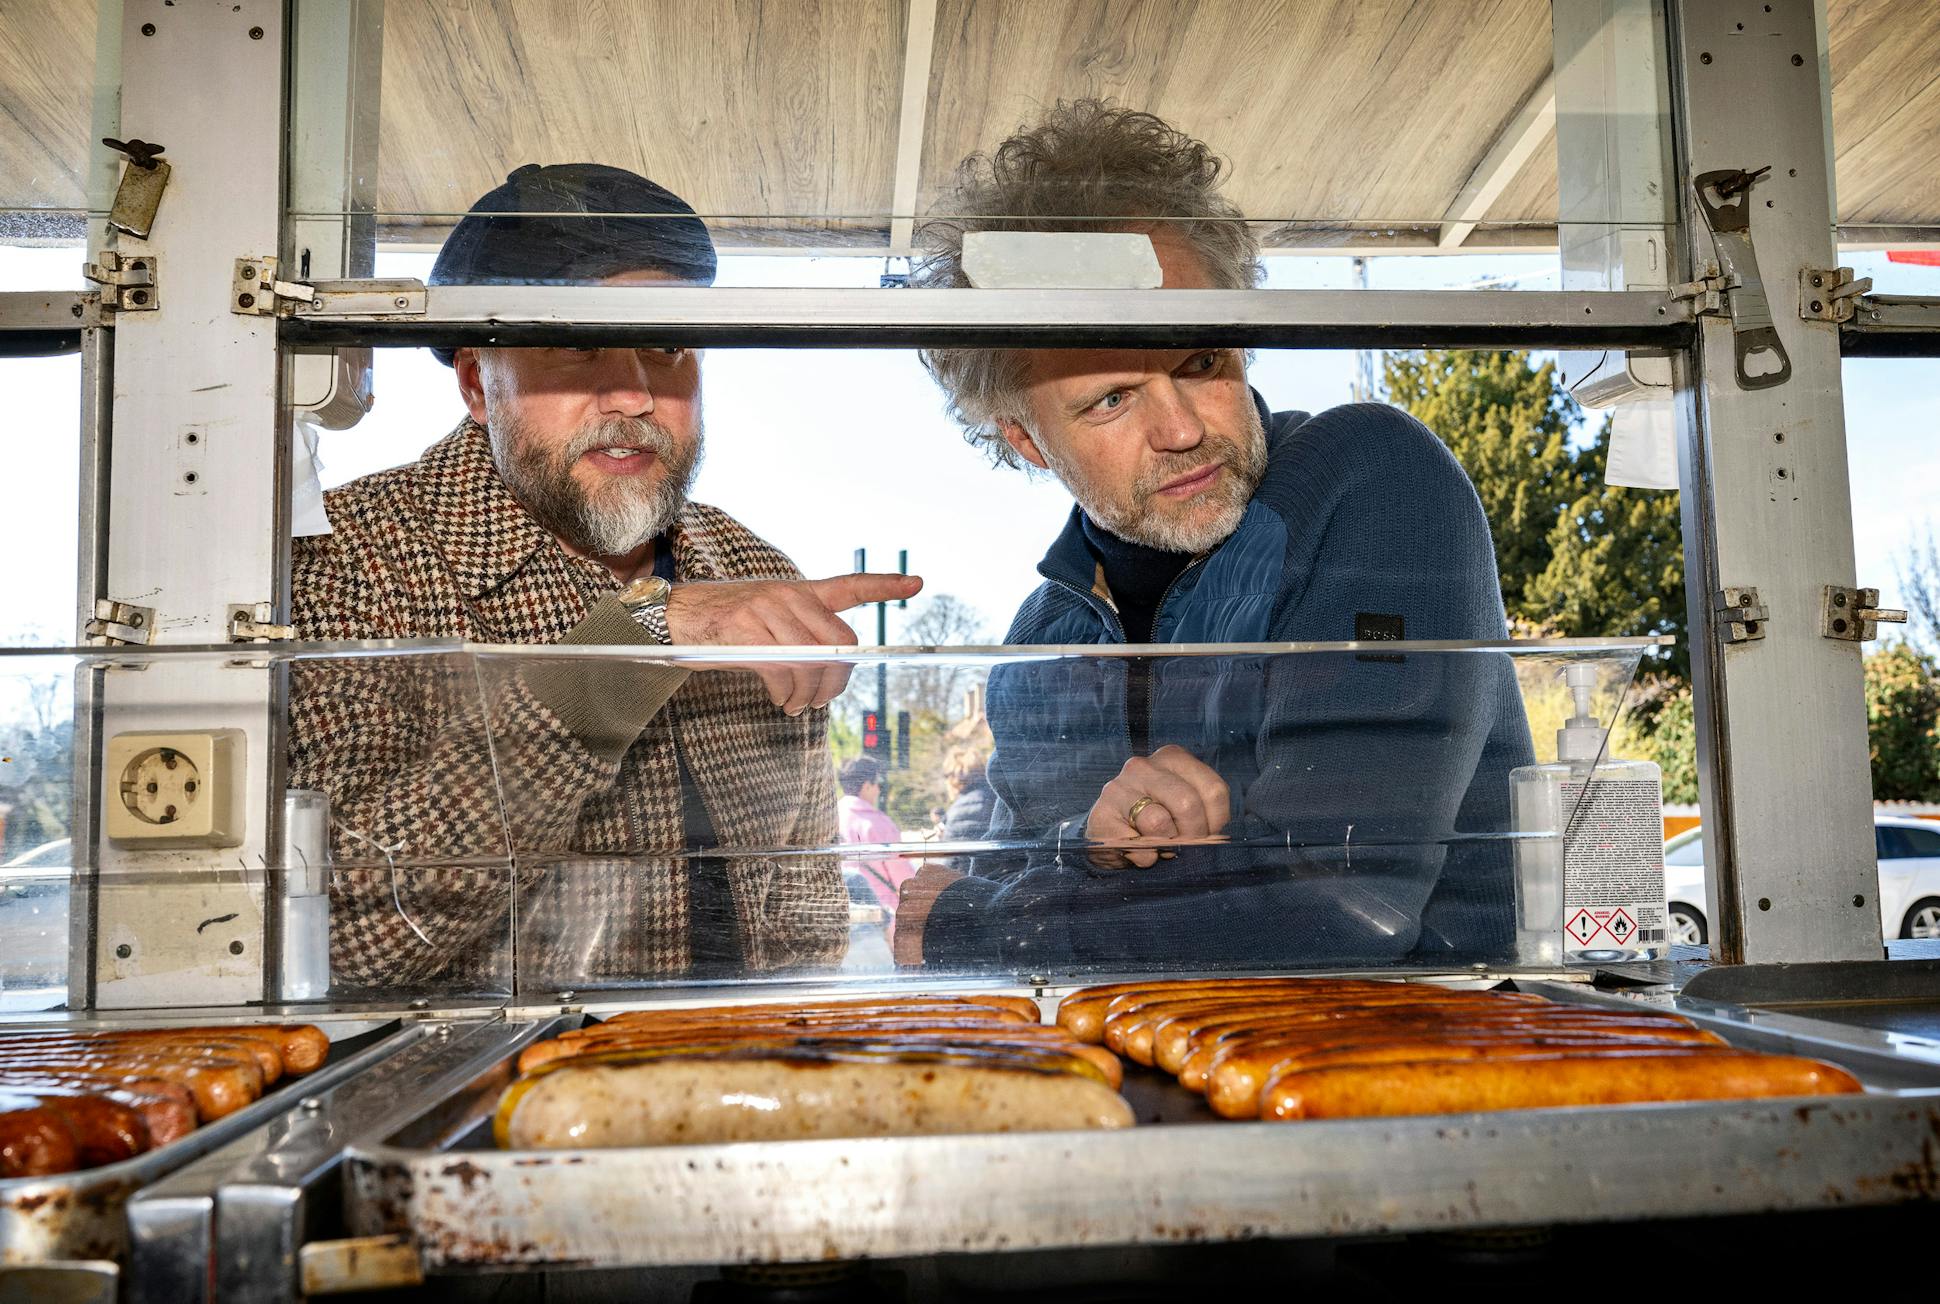 Thomas Søndergård and his husband, Andreas, checked out a sausage stand, a common sight in Copenhagen.